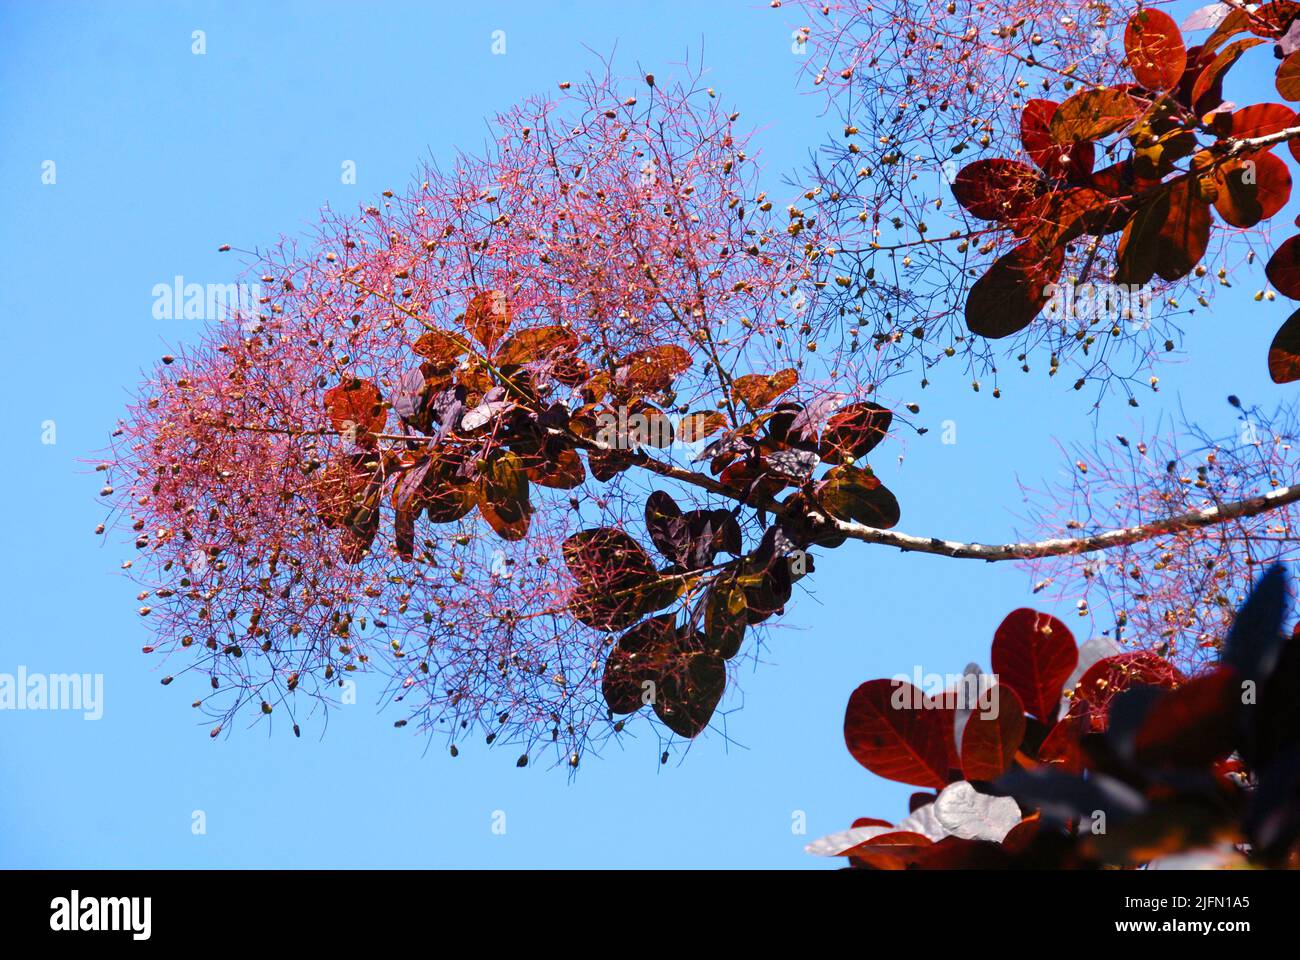 Cotinus coggygria against cloudless blue sky Stock Photo